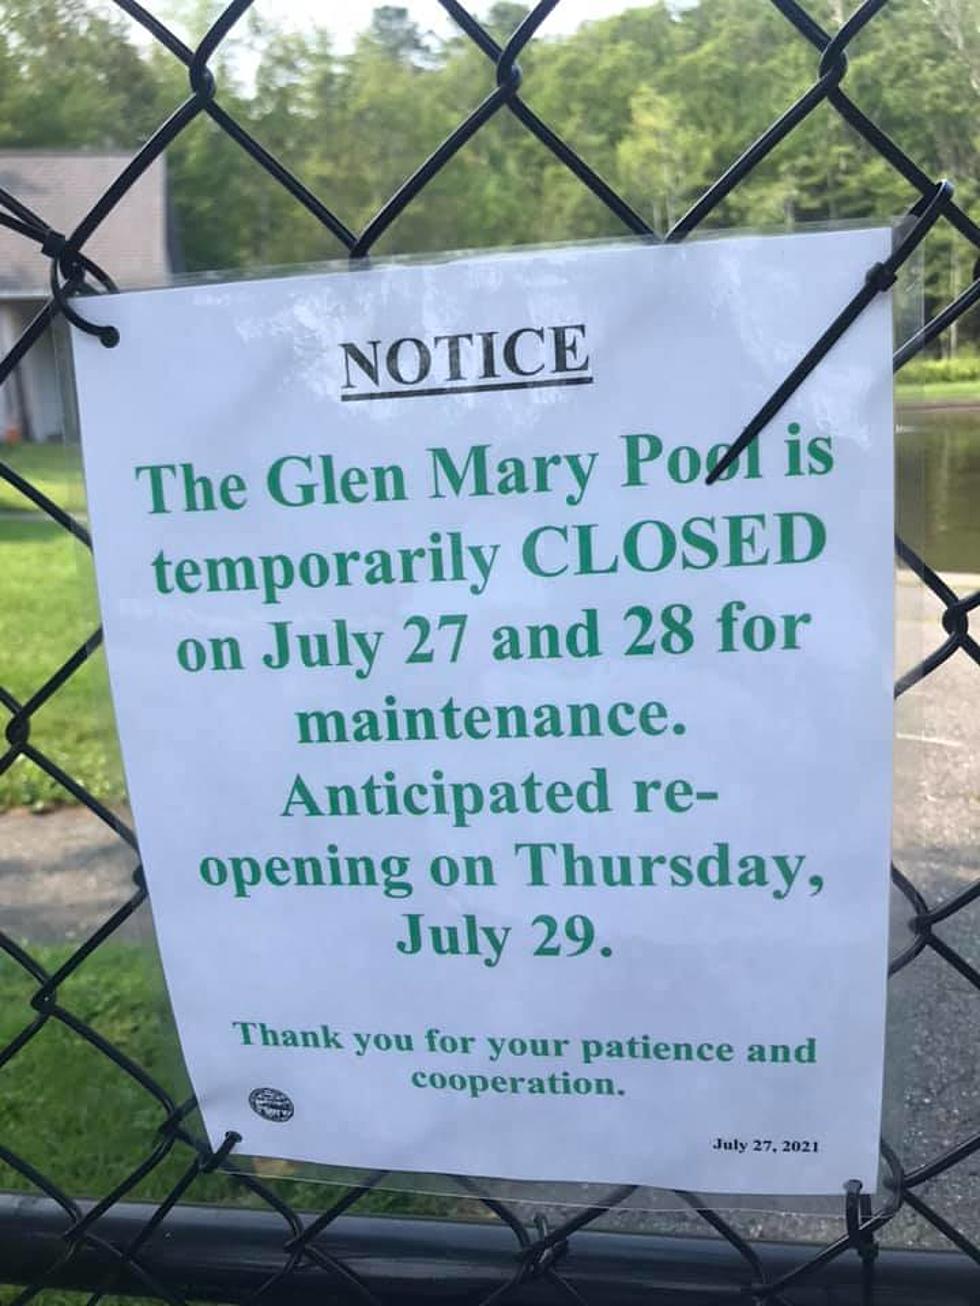 Bar Harbor’s Glen Mary Wading Pool Temporarily Closed July 27 and 28